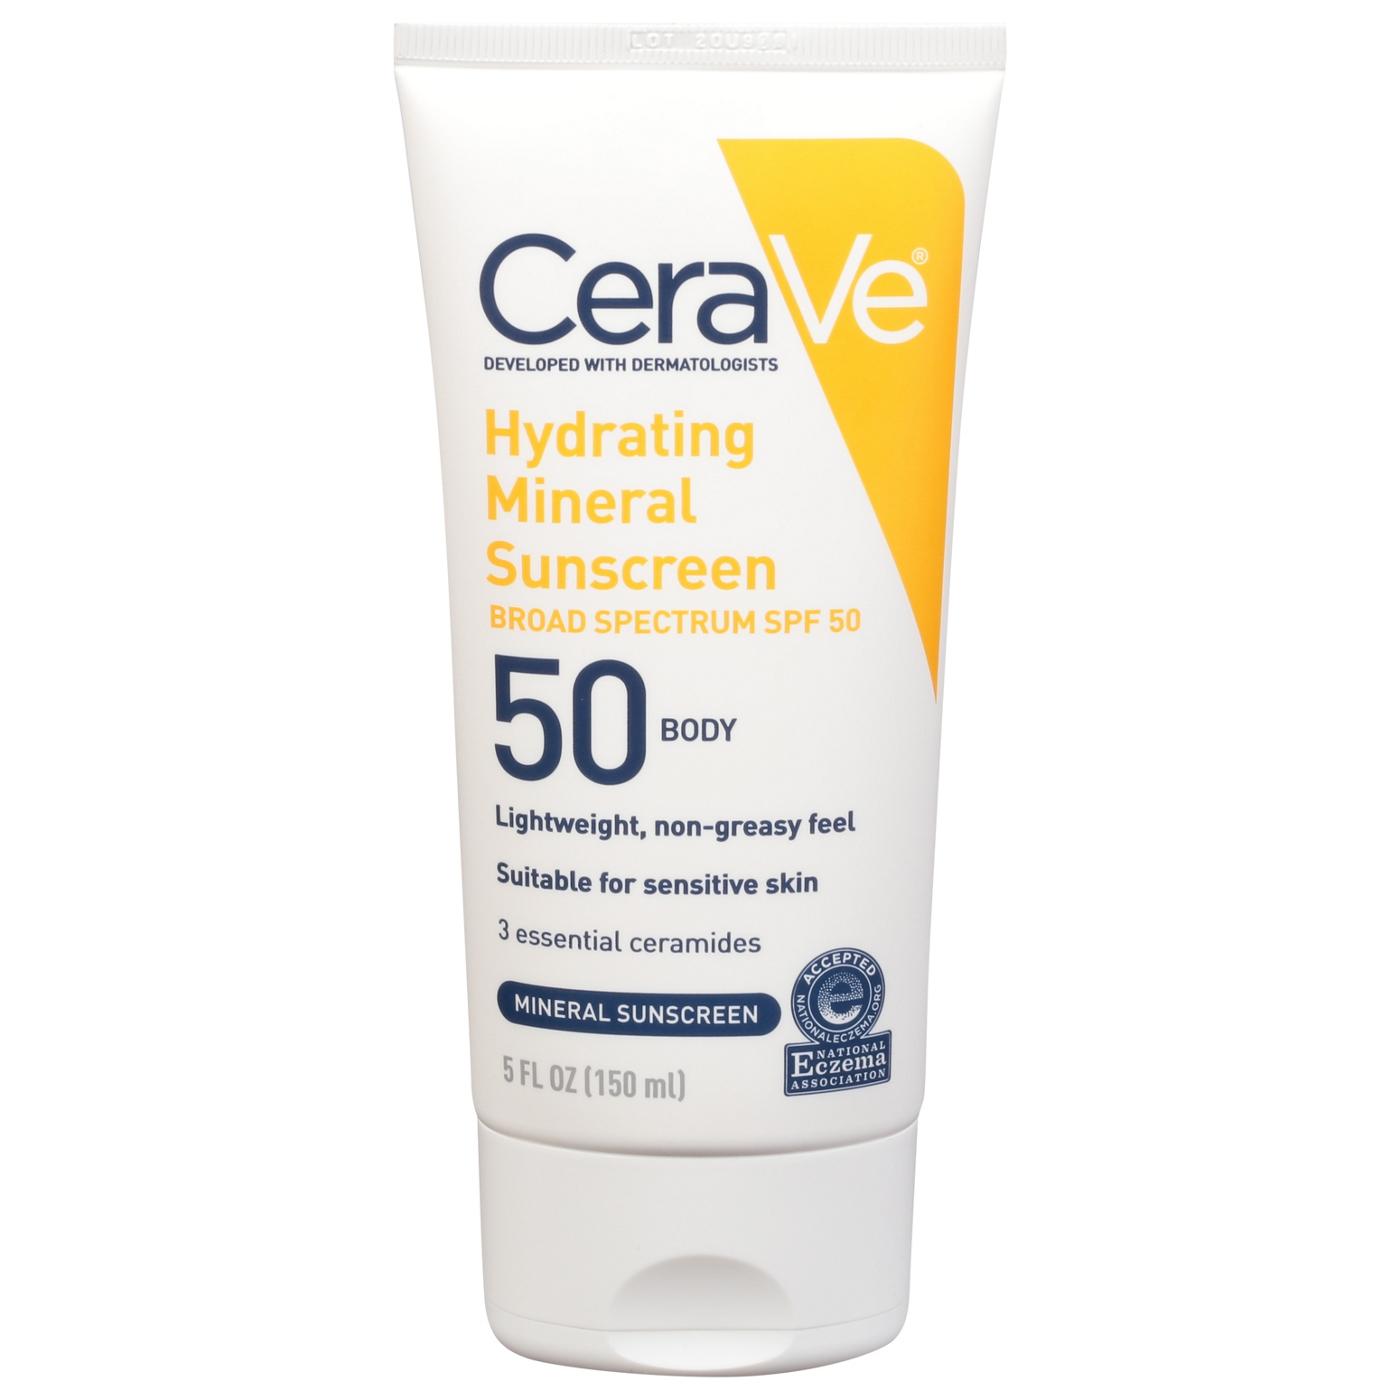 CeraVe Hydrating Mineral Sunscreen Body Lotion Broad Spectrum SPF 50 ; image 1 of 3